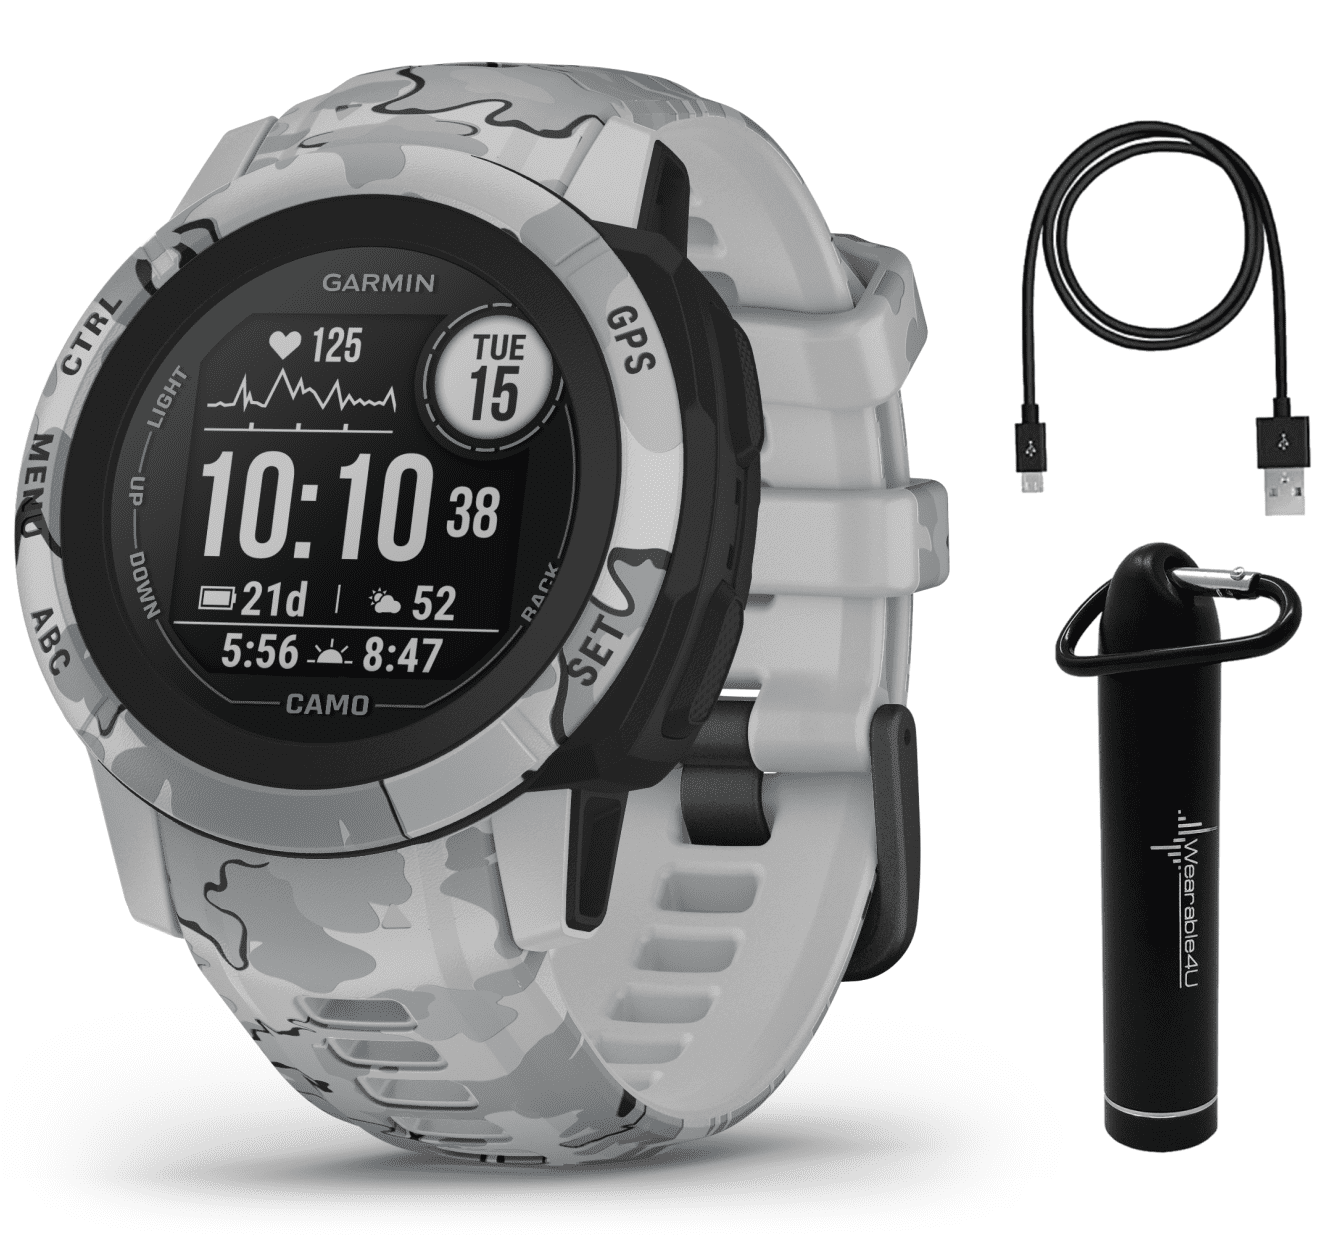  PlayBetter Garmin Instinct 2 (Electric Lime) Rugged GPS  Smartwatch - Outdoor Military Watch with Multi-GNSS & 24/7 HR Fitness  Tracker - Bundle w TPU Screen Protectors & Portable Charger - Large, 45mm :  Electronics